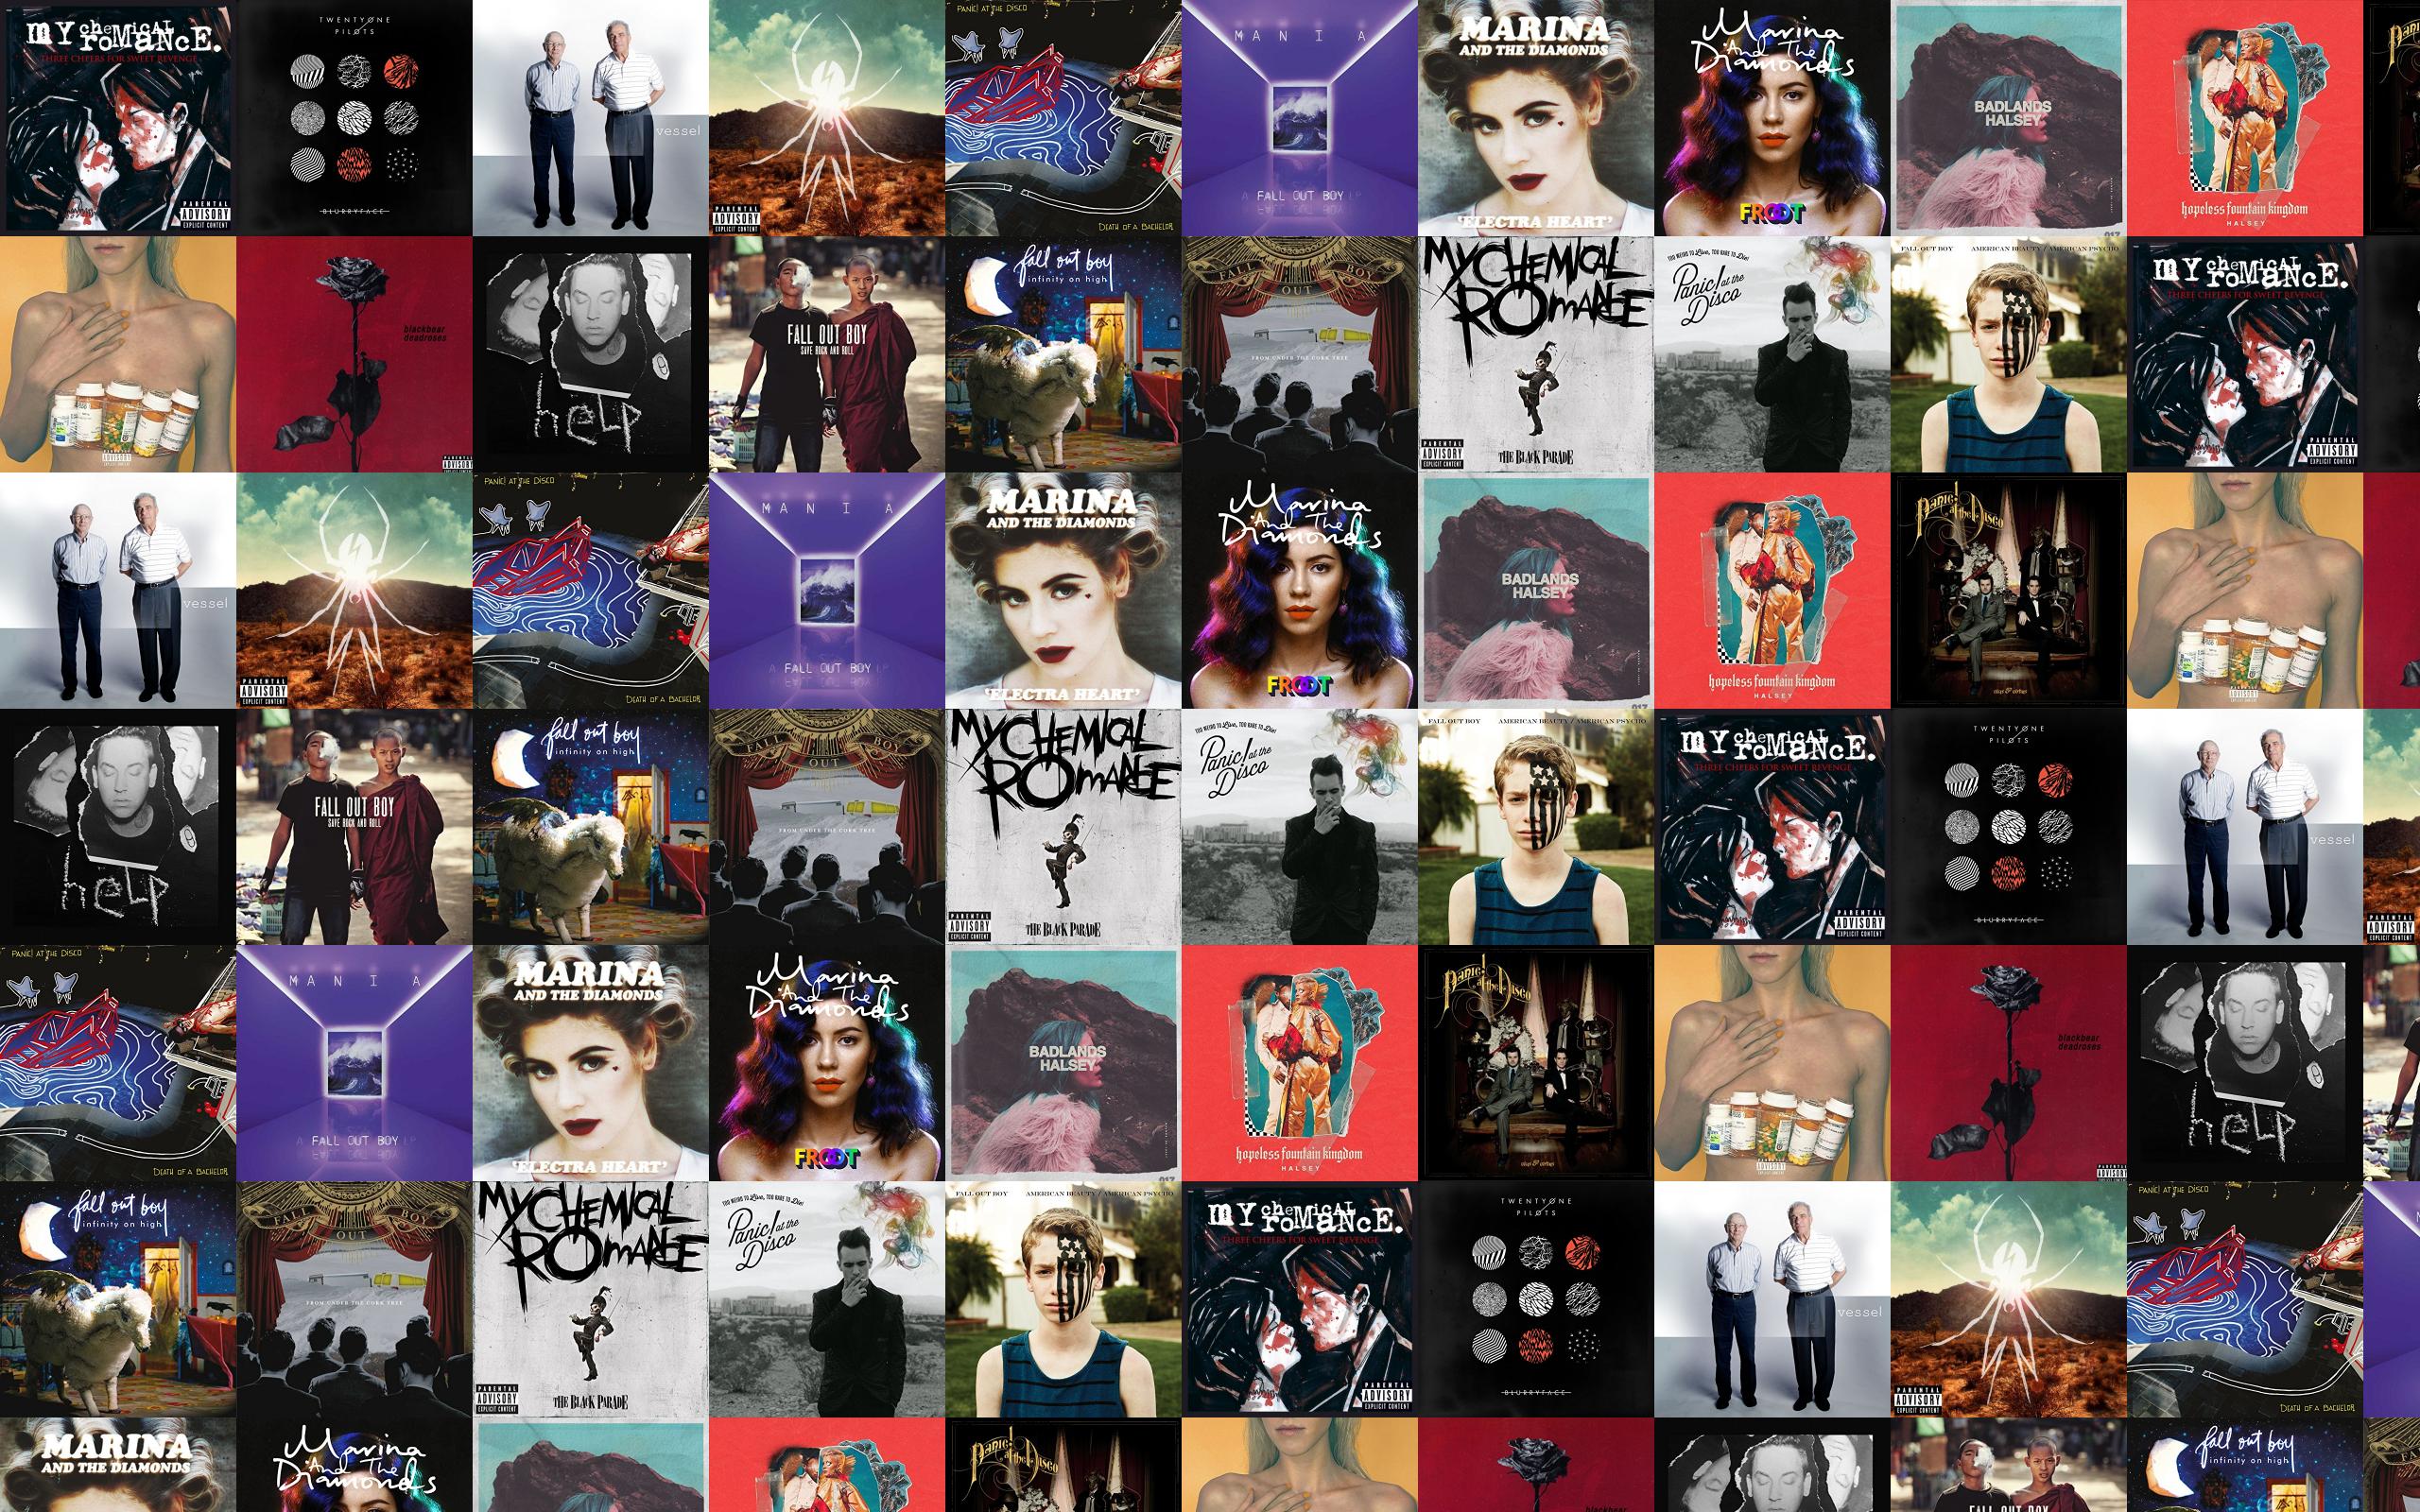 Fall Out Boy Waterparks Albums Wallpaper Computer - HD Wallpaper 